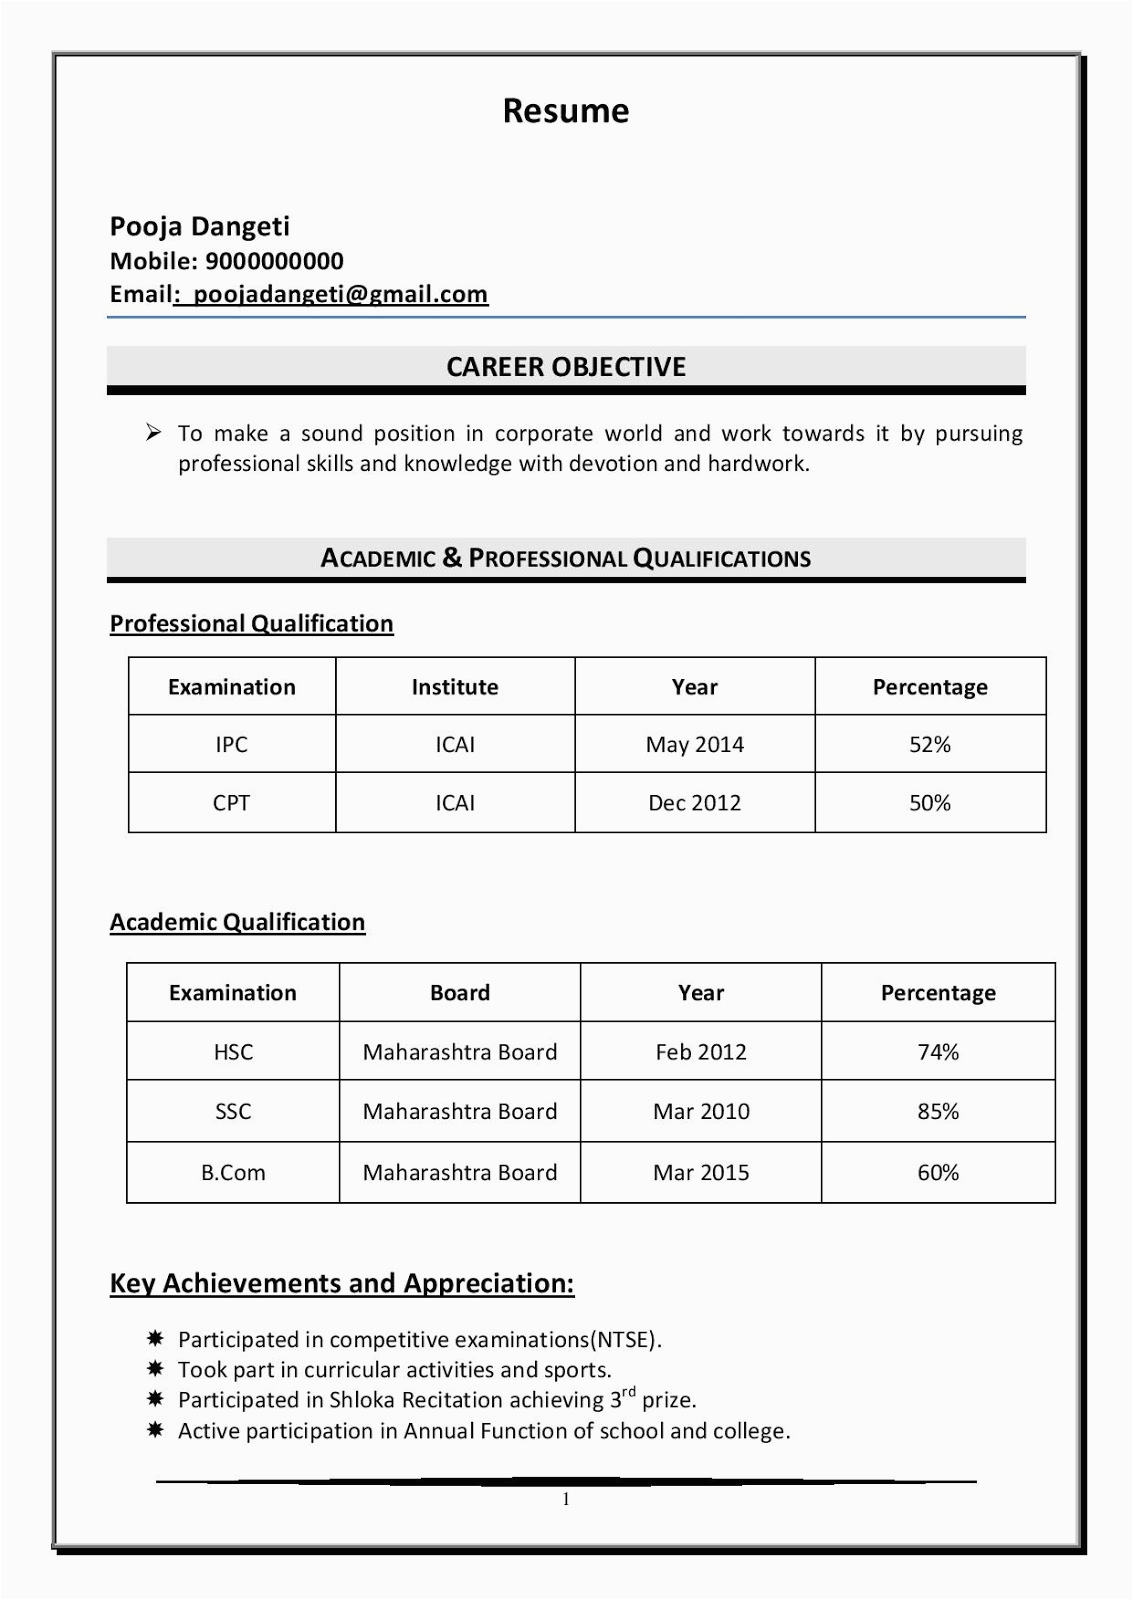 Job Application Resume Samples for Freshers Job Application Resume format for Freshers B Best Resume Examples